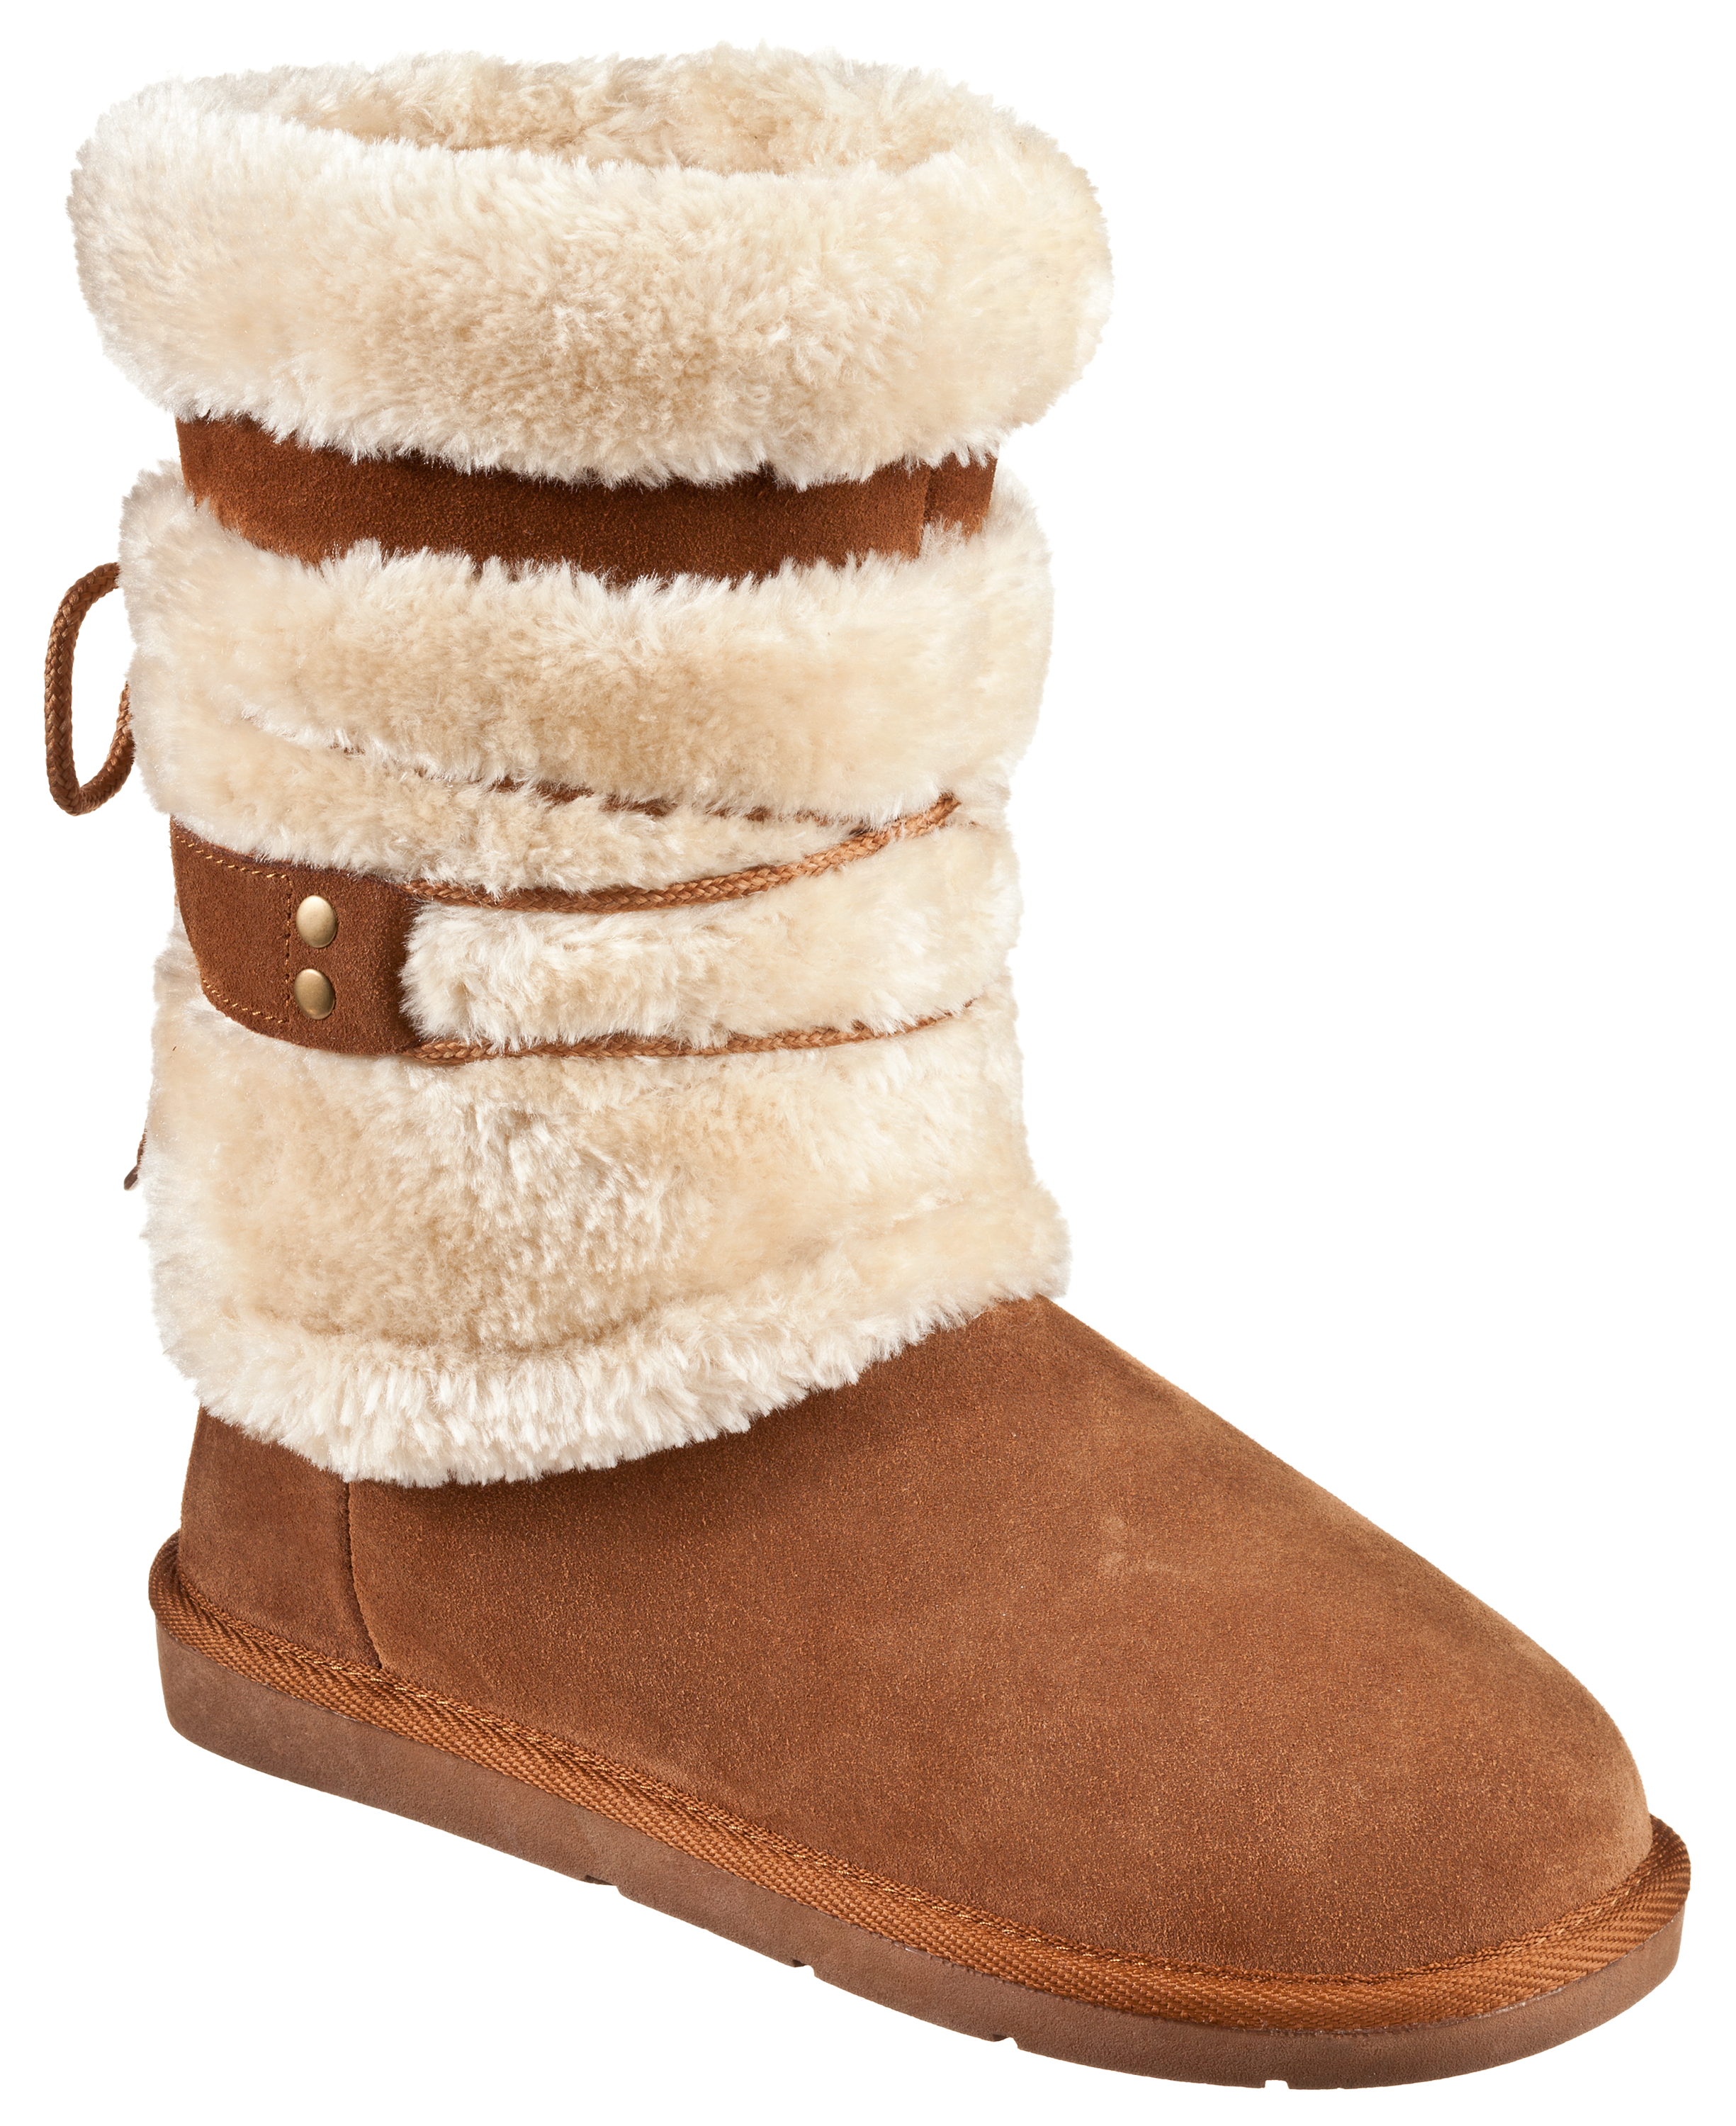 UGG - Fur-Lined Snow Boots - Women - Lamb Fur/Suede/Rubber - 9 - Brown